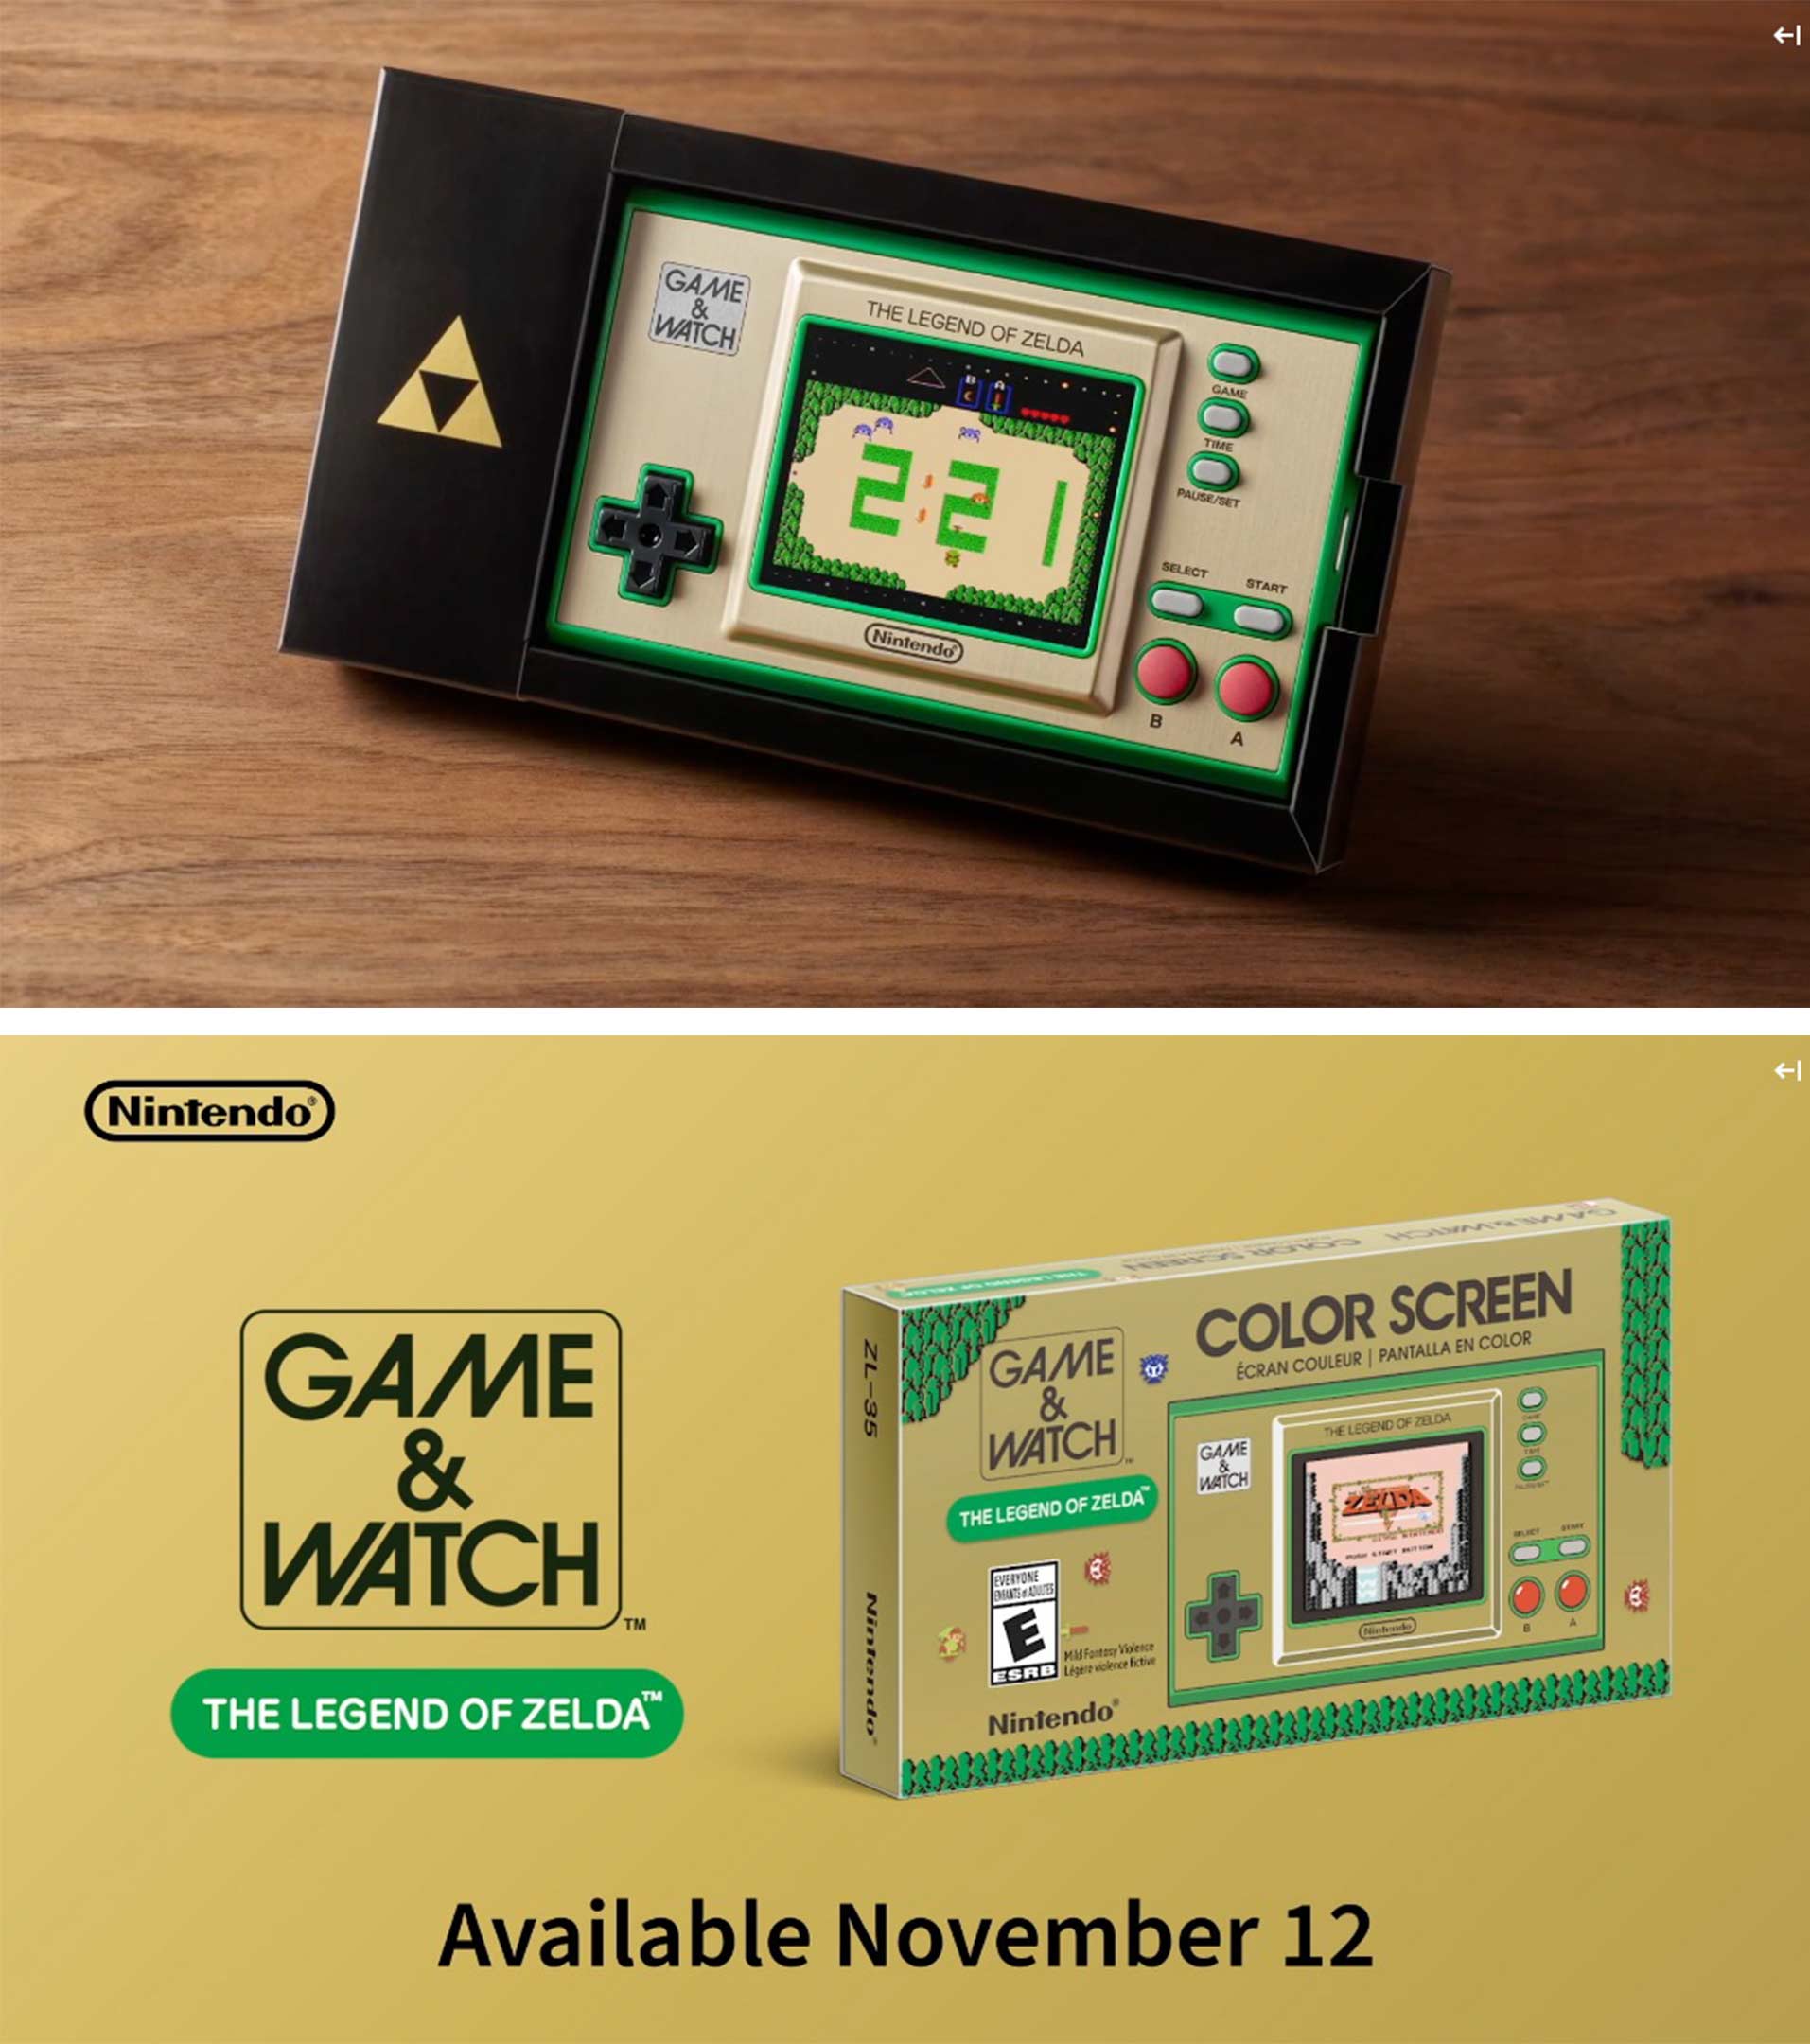 Console Nintendo GameWatch: The Legend Of Zelda Albagame